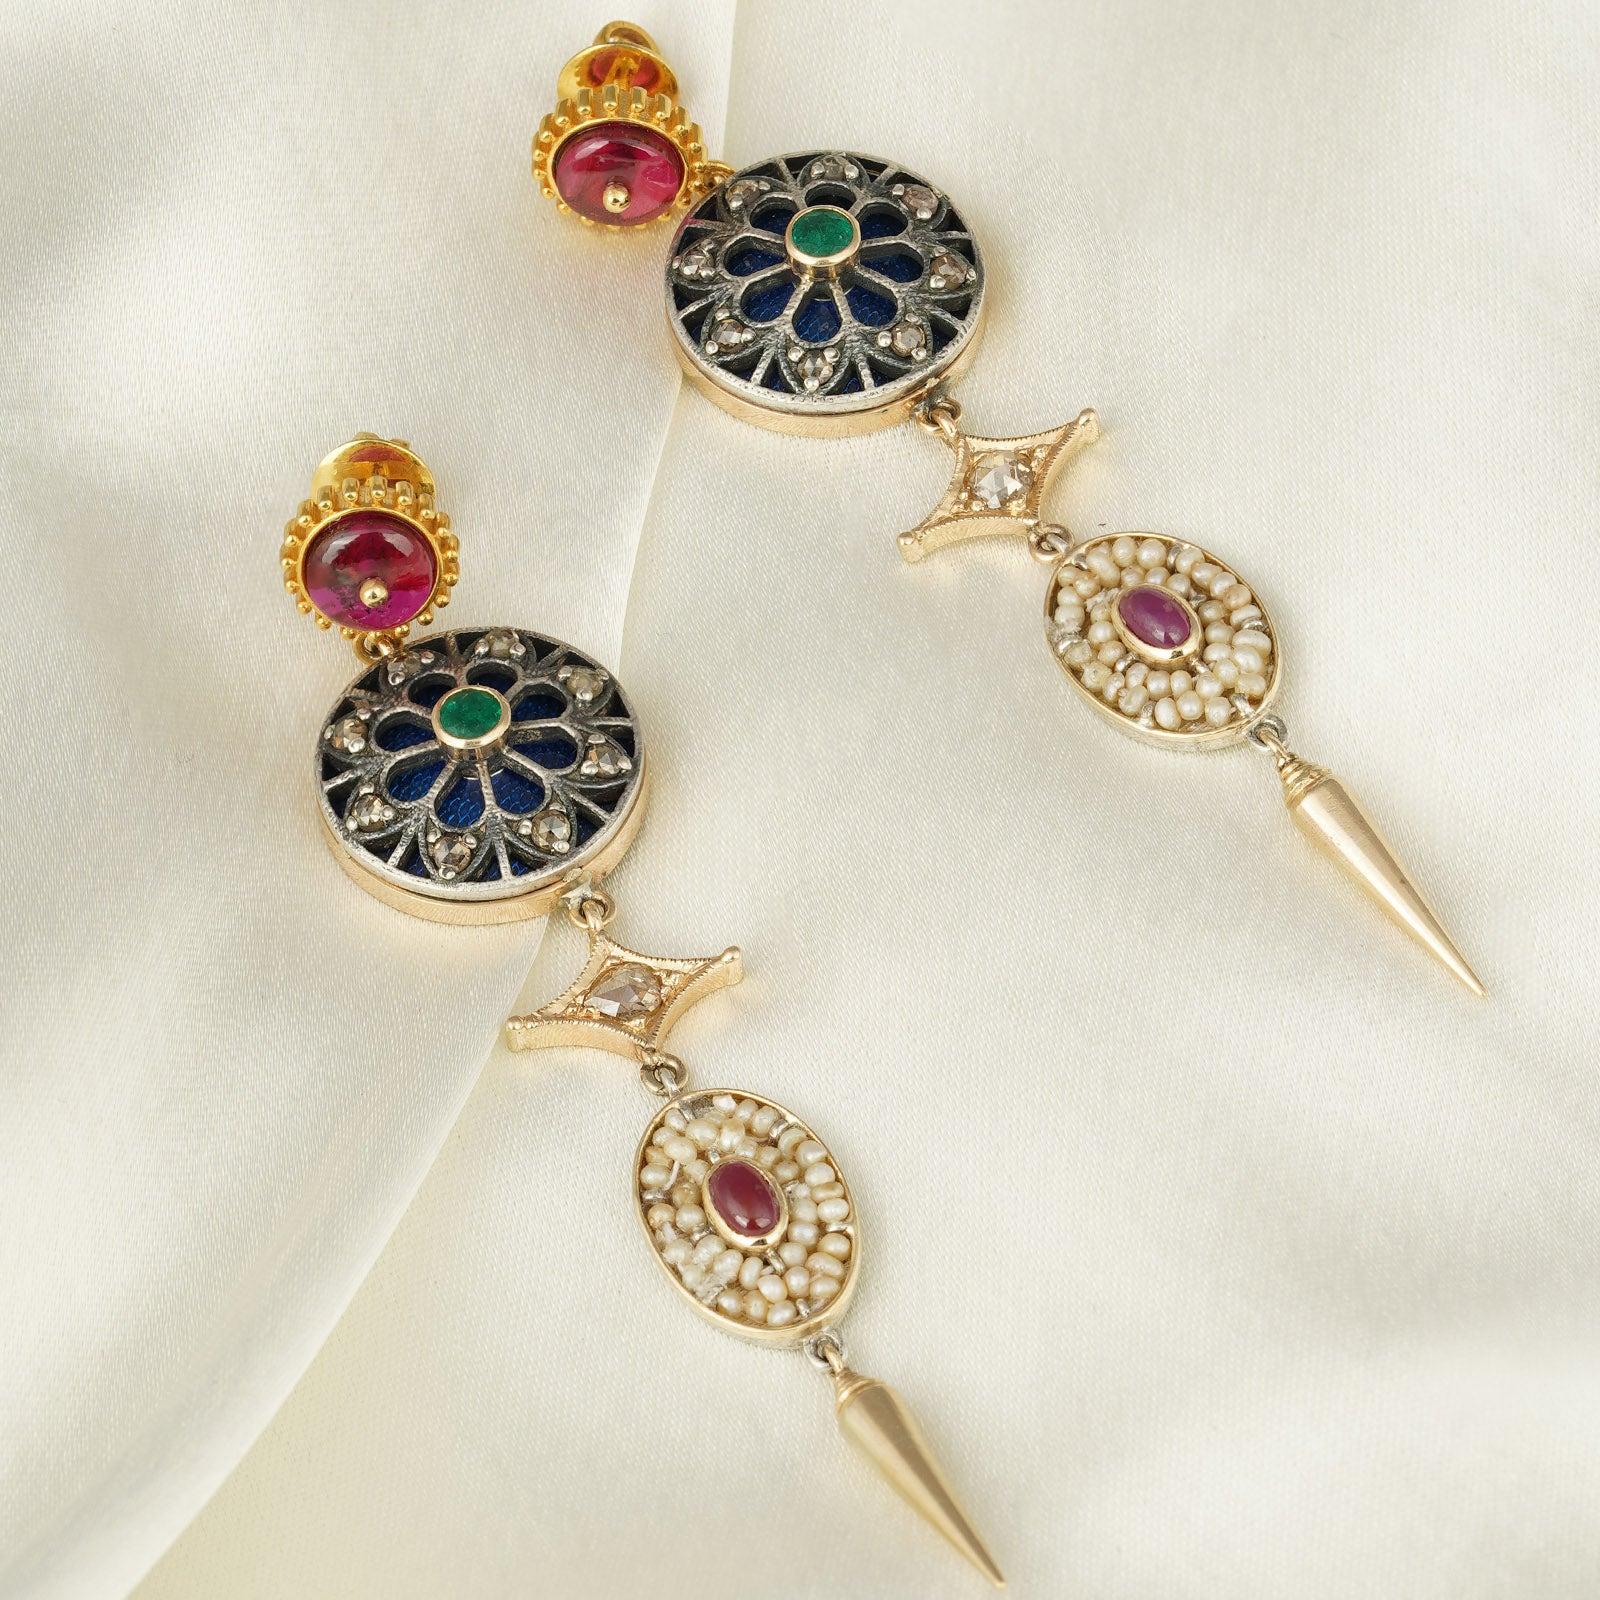 
Gold(14K) : 9.51g
Rose-cut Diamonds : 0.95ct
Gemstone : Emerald, Ruby, Cultured Pearls
Other : Blue Enamel
925

India-inspired, the Firdos earrings are a nod to 1940s Hollywood style, when chandelier earrings were a 'big thing'. These earrings